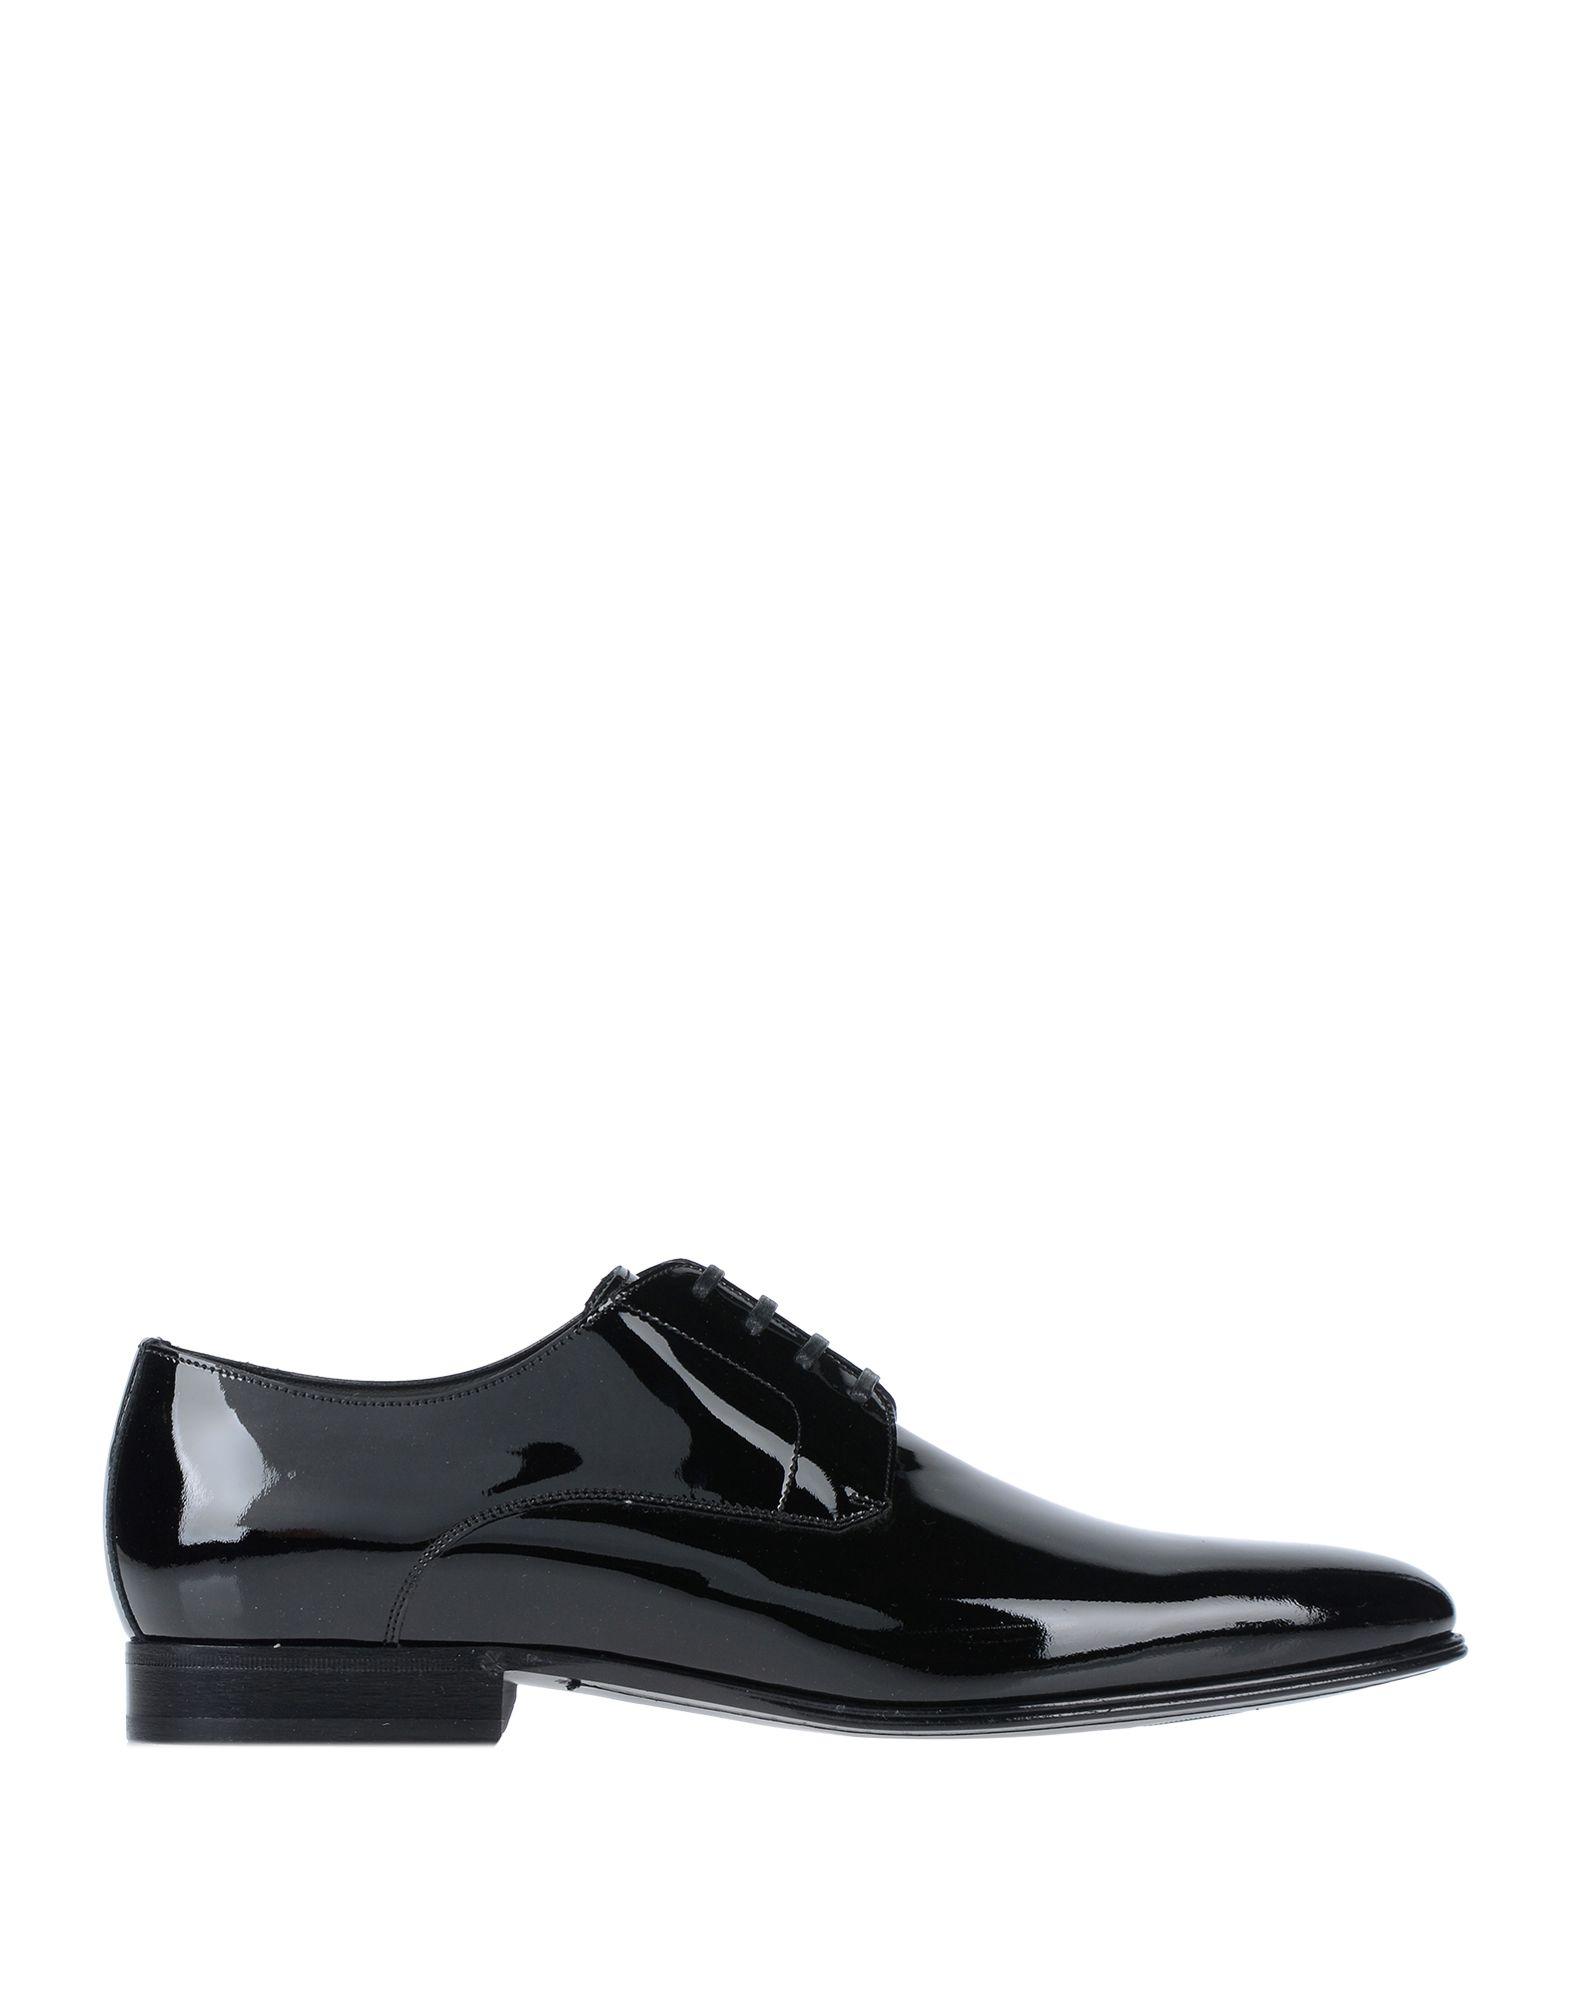 Dolce & Gabbana Leather Lace-up Shoe in Black for Men - Lyst